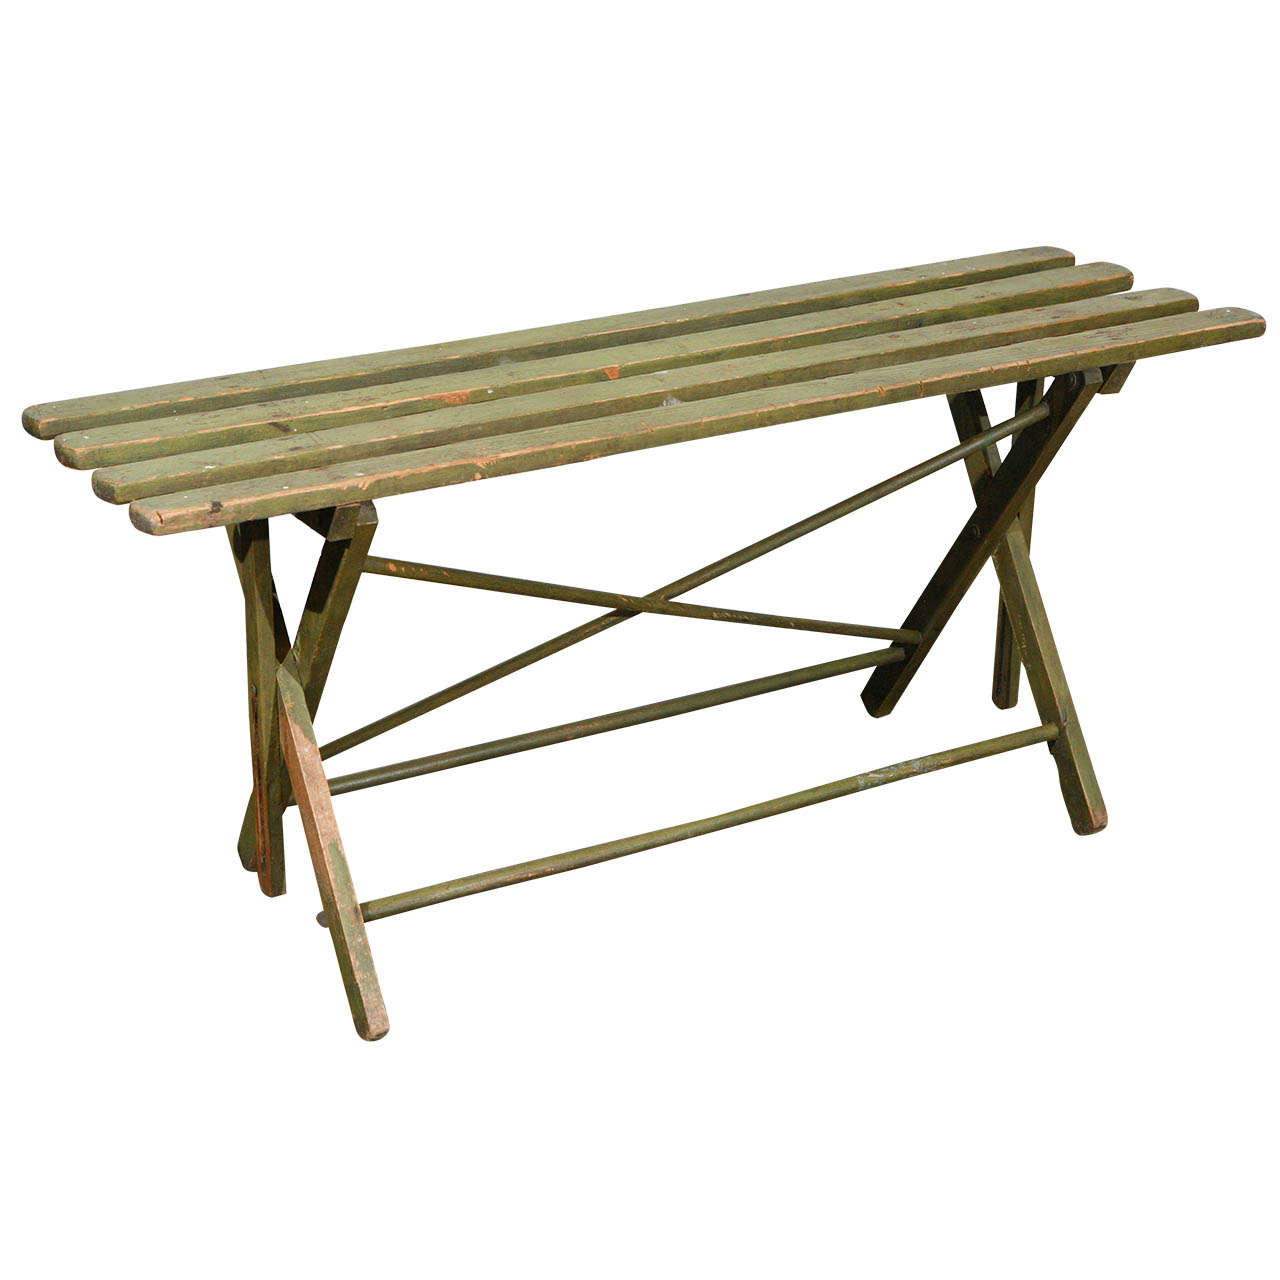 American Country 1930's Green Painted Wooden Slated Folding Bench/Table For Sale